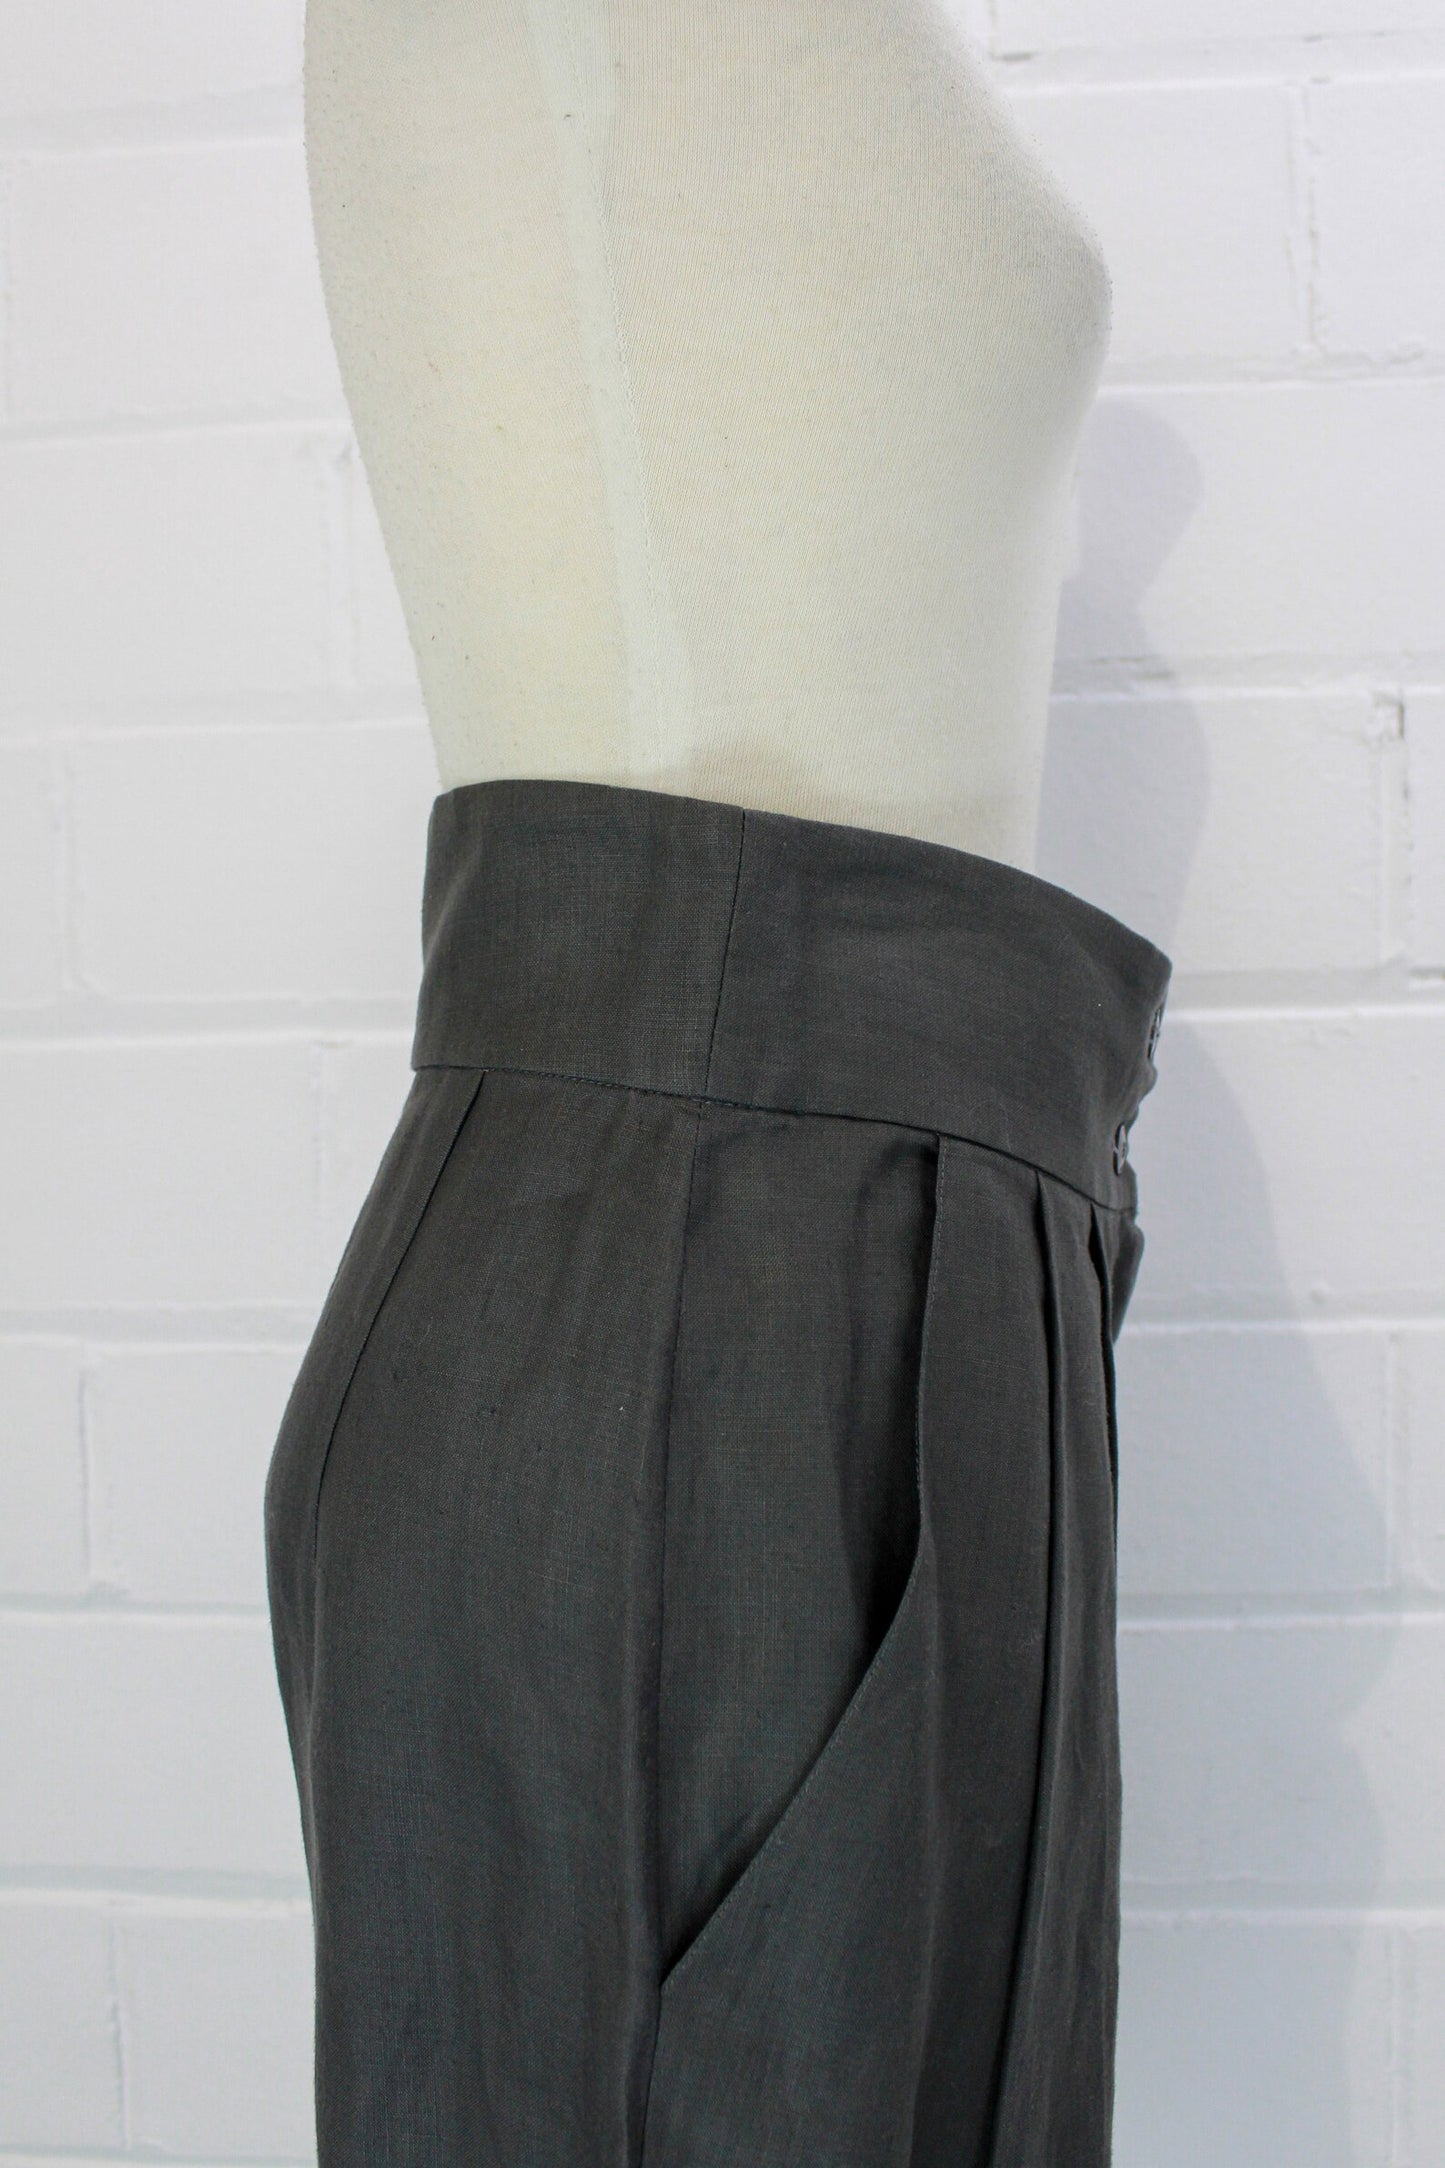 Vintage 1980s Linen Charcoal Bermuda Shorts, Dress Shorts, Business Casual Minimalist Shorts, Pleated Front, Available Sizes 27", 29"